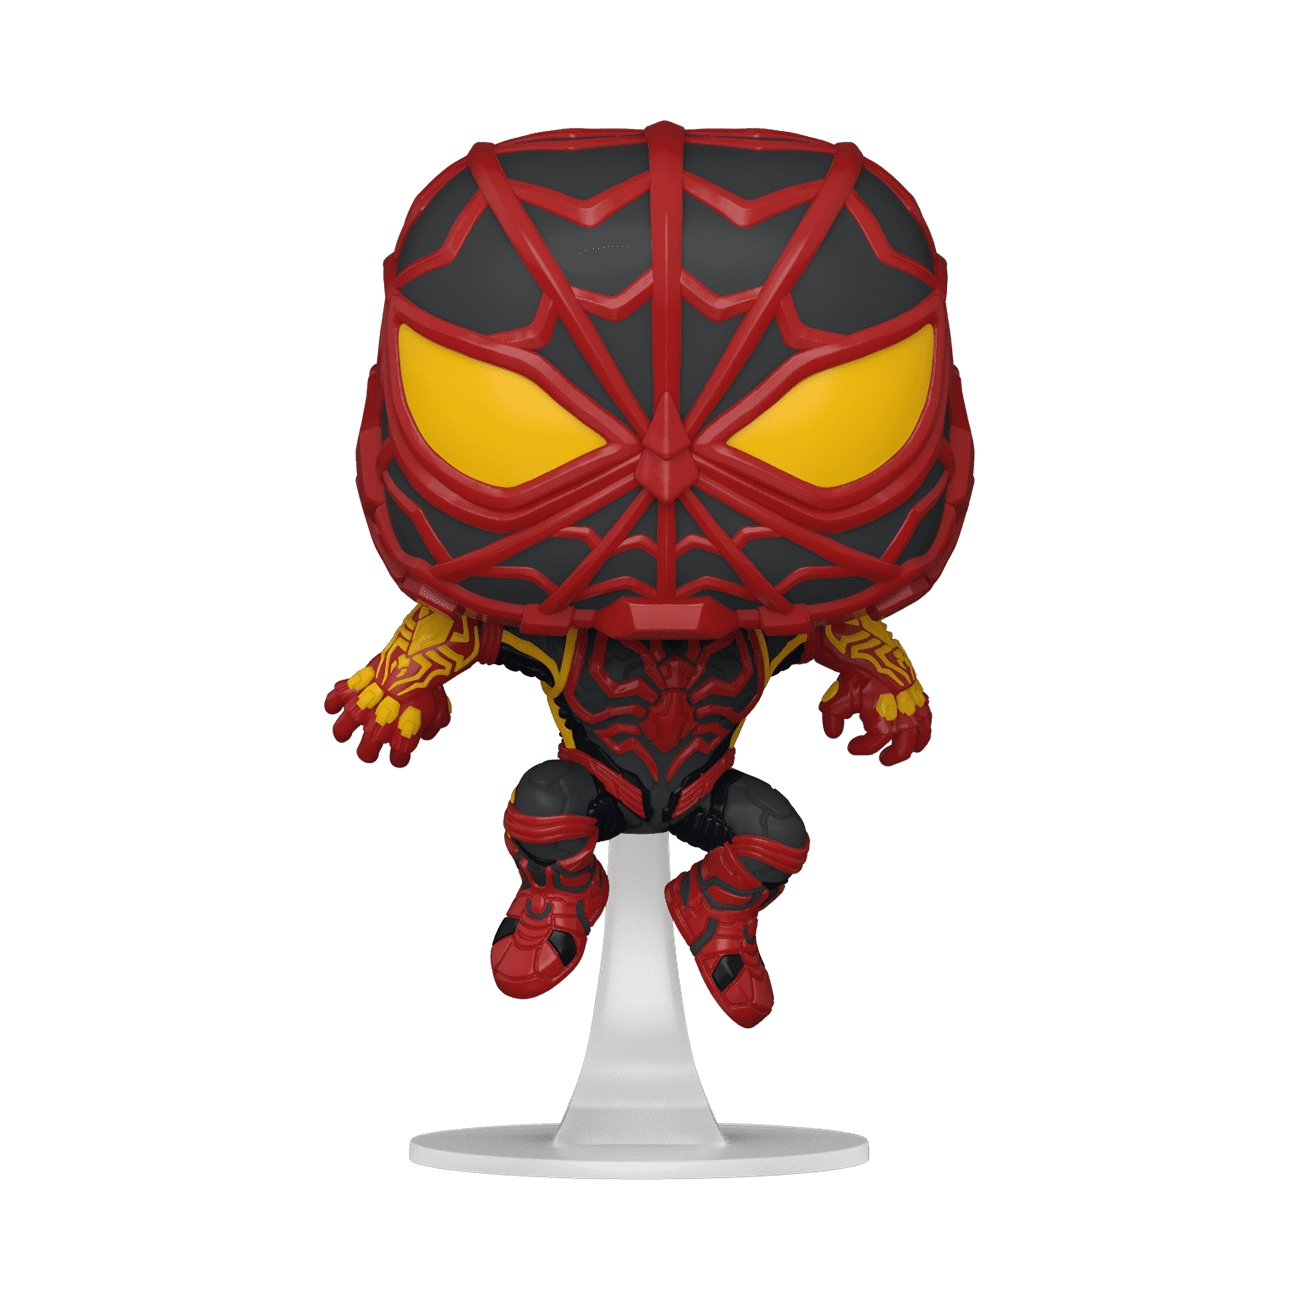 Funko POP! Games: Marvel's Spider-Man: Miles Morales - Miles Morales  Classic (or Chase) 4.15-in Vinyl Figure